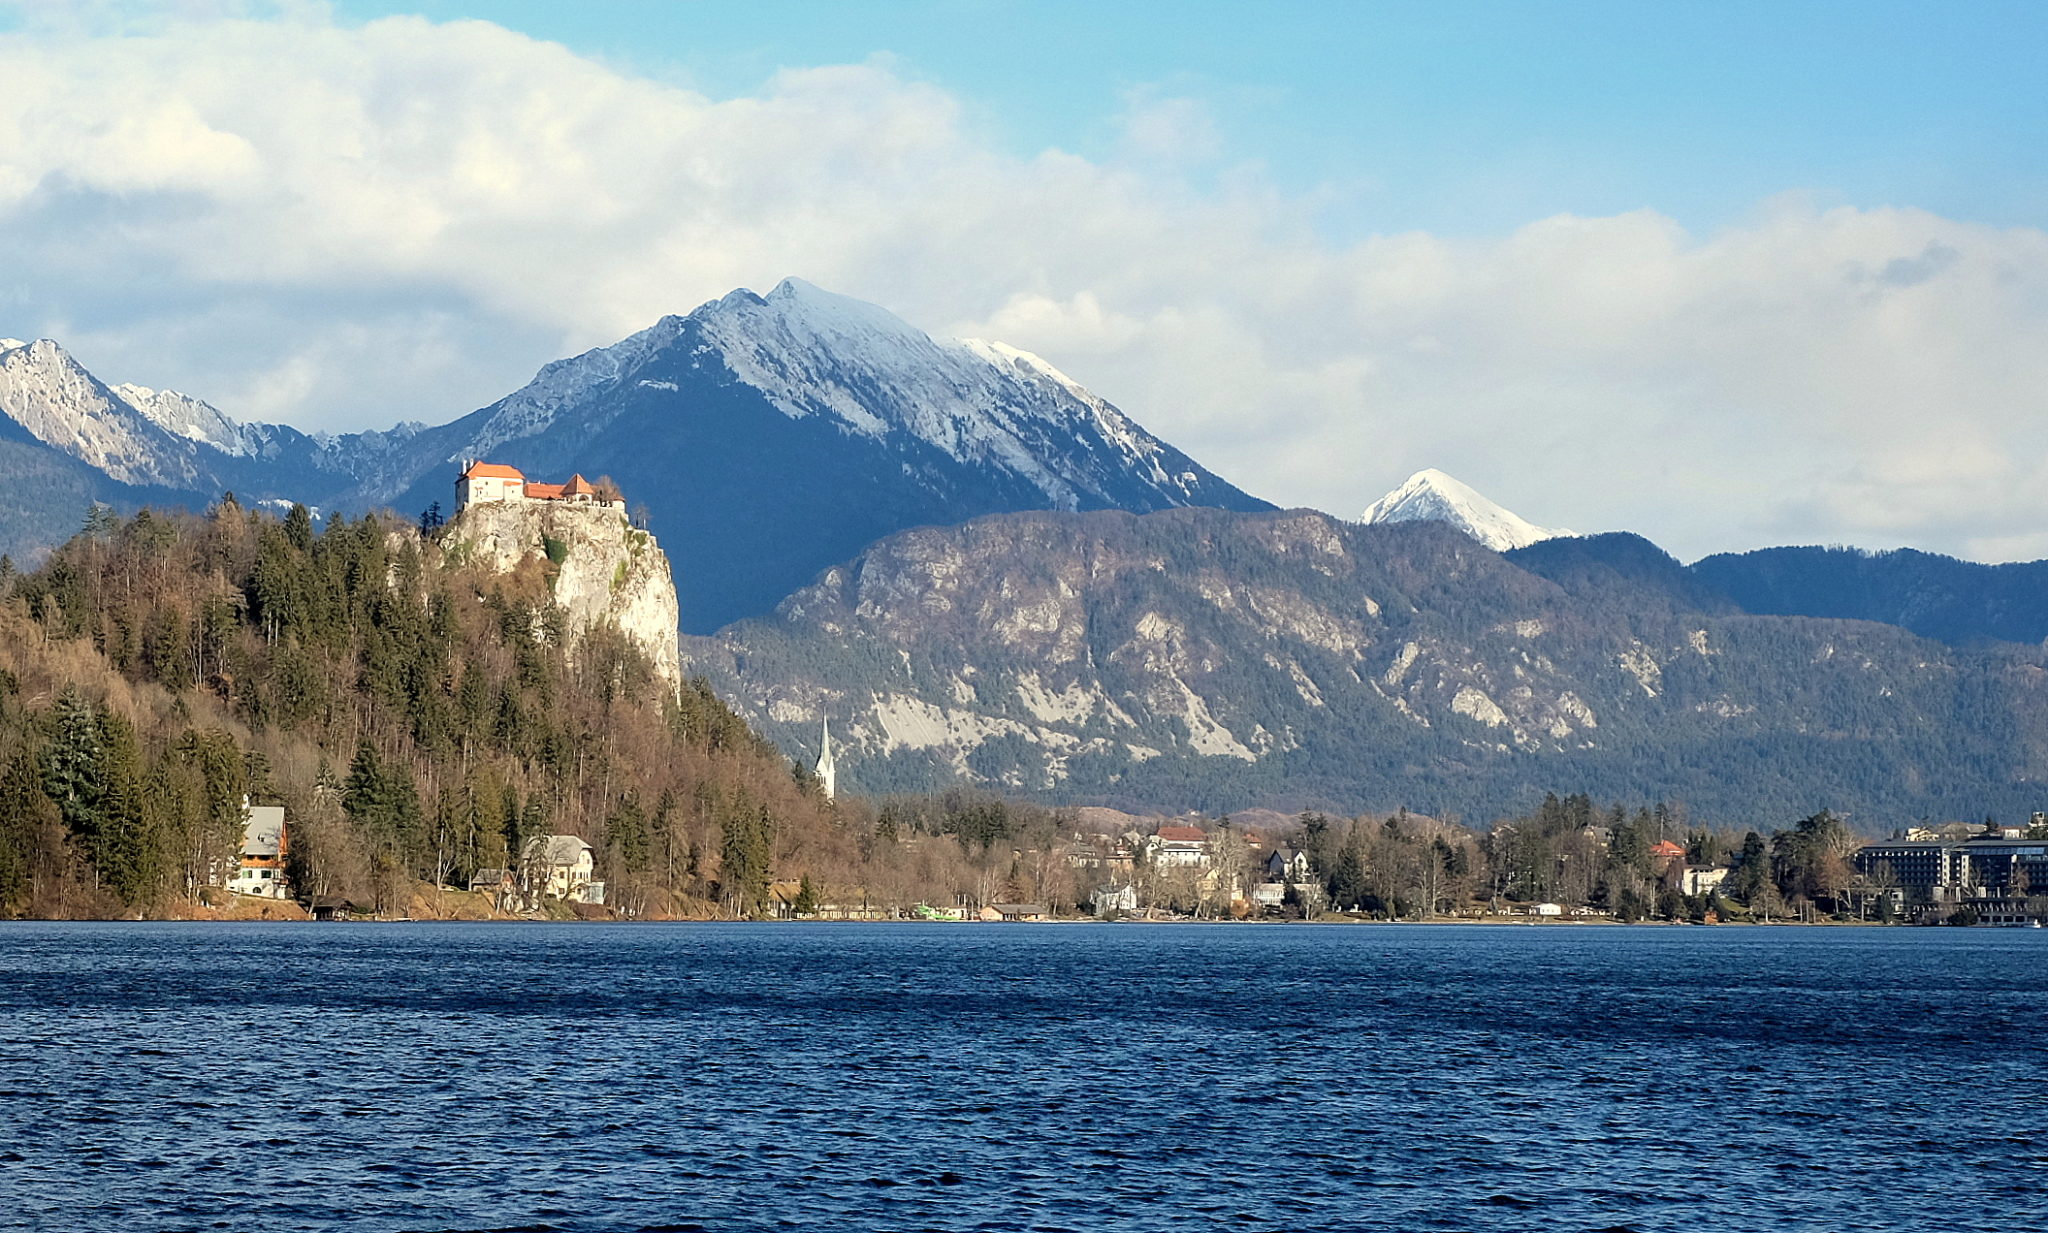 It’s a 20-minute drive from Bled to the start of the Begunjščica trail.